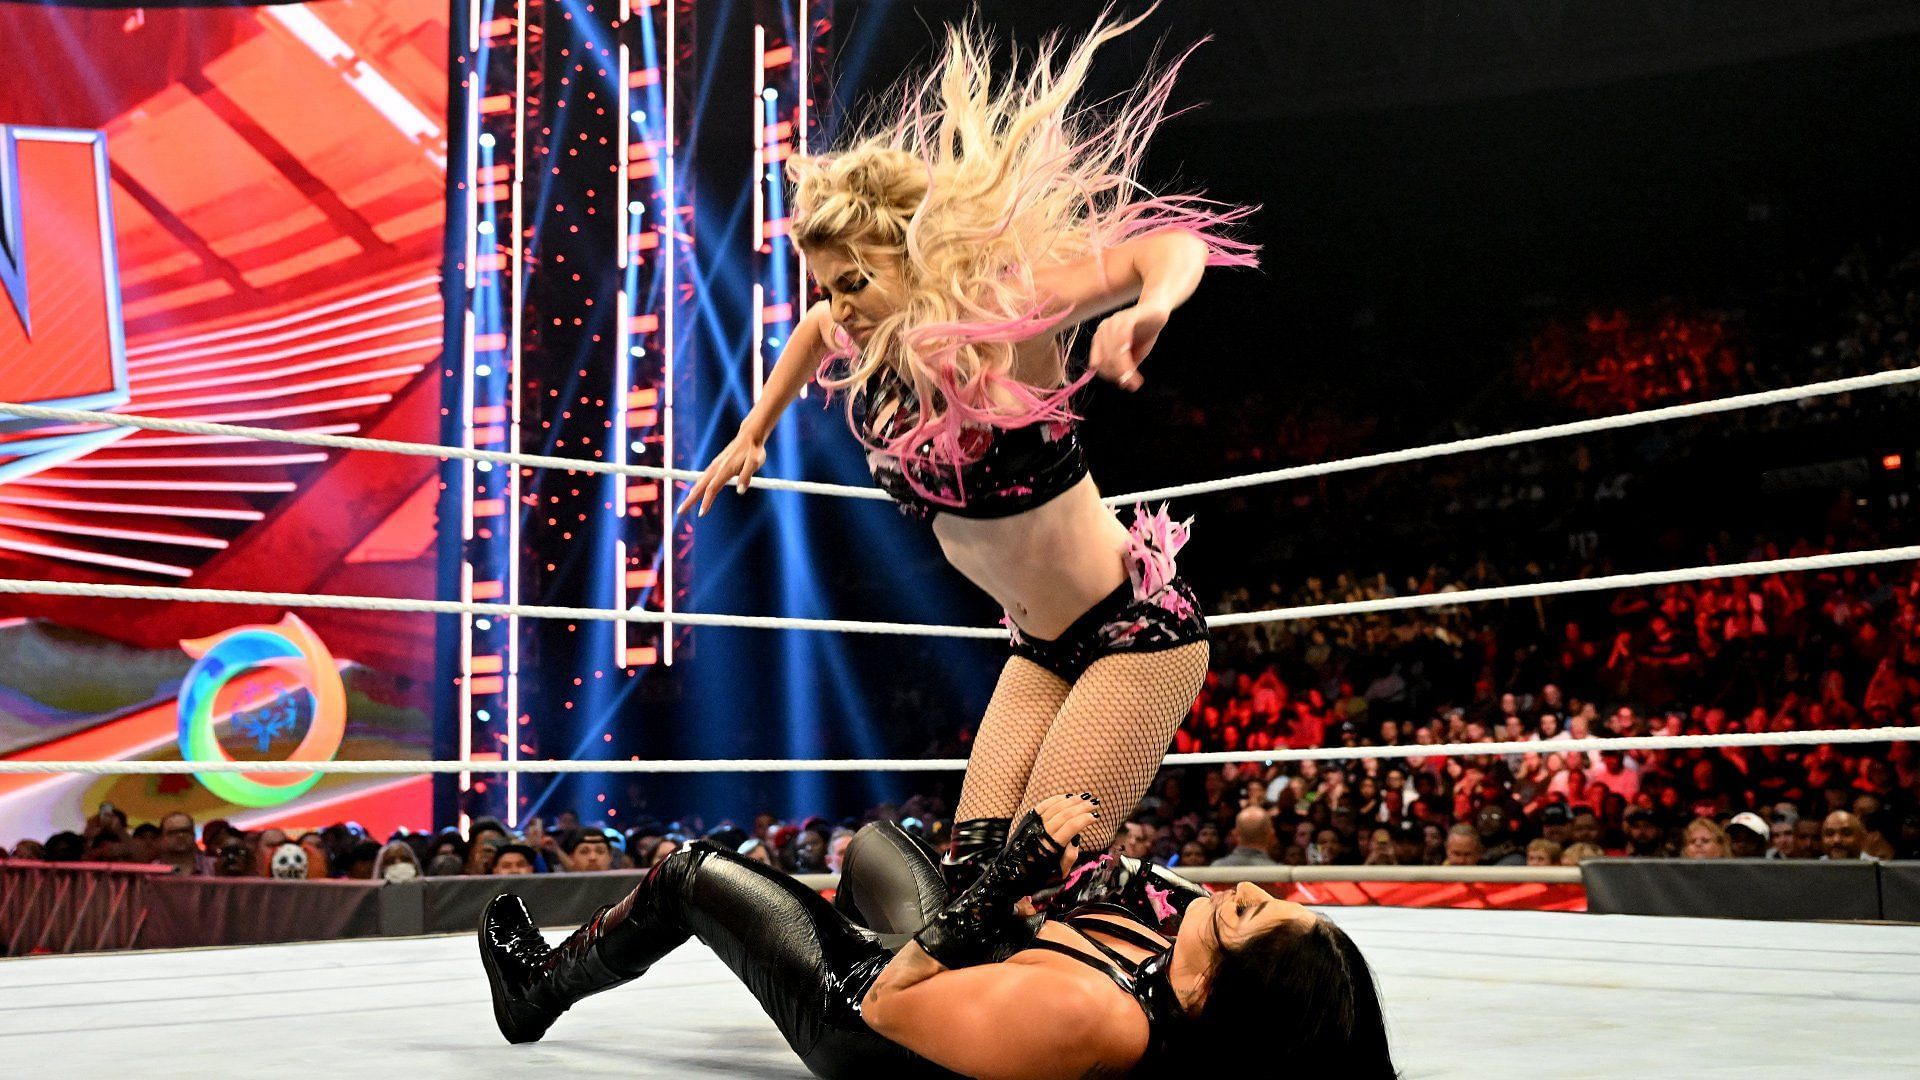 Sonya Deville and Alexa Bliss in action